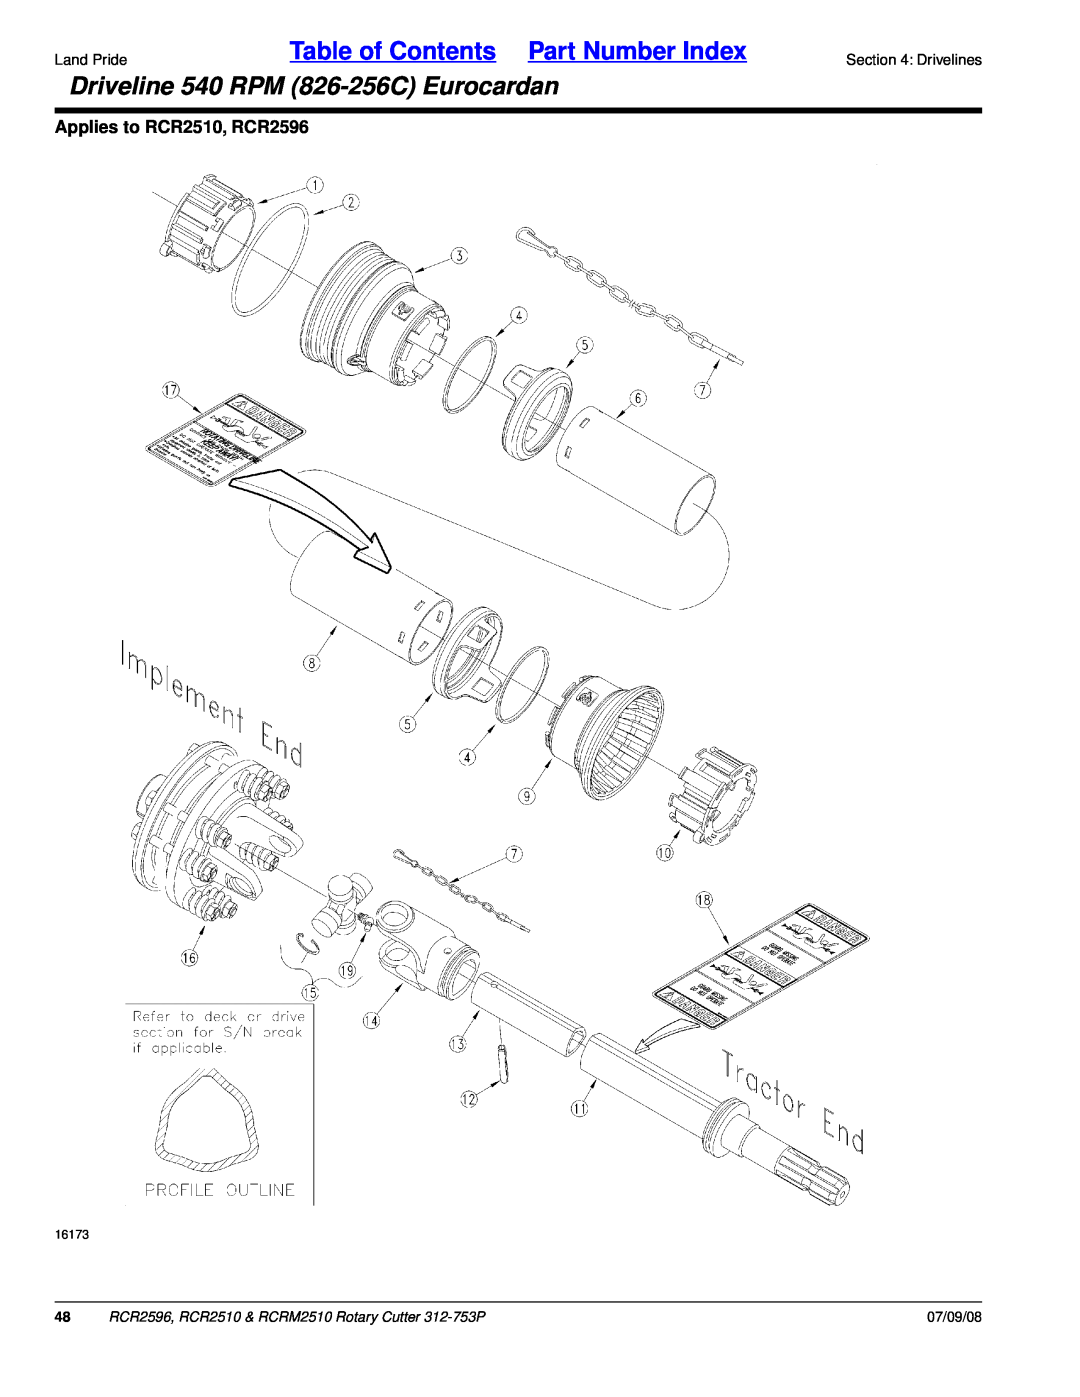 Land Pride manual Driveline 540 RPM 826-256CEurocardan, Table of Contents Part Number Index, Applies to RCR2510, RCR2596 